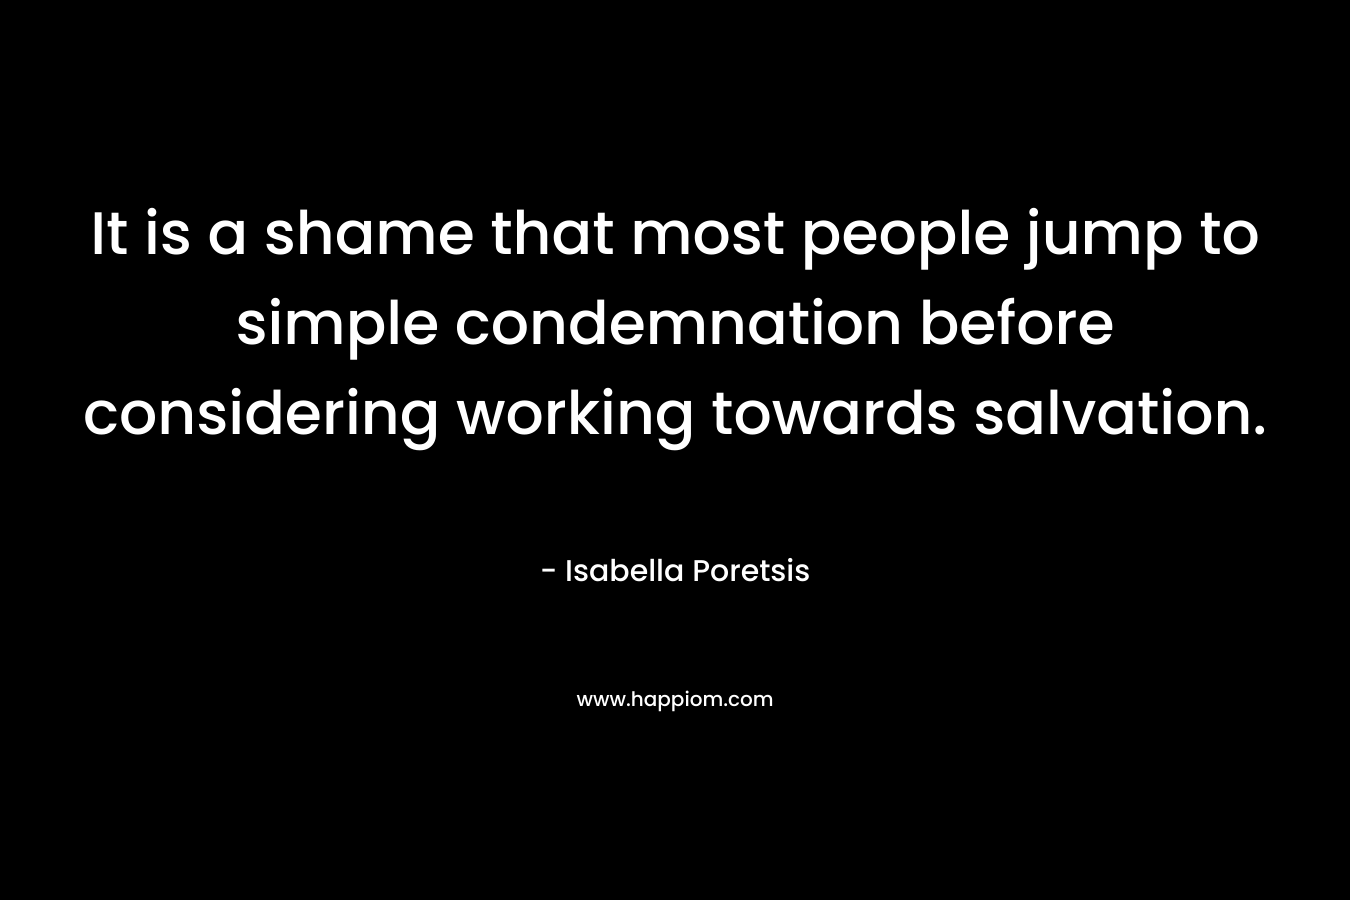 It is a shame that most people jump to simple condemnation before considering working towards salvation. – Isabella Poretsis